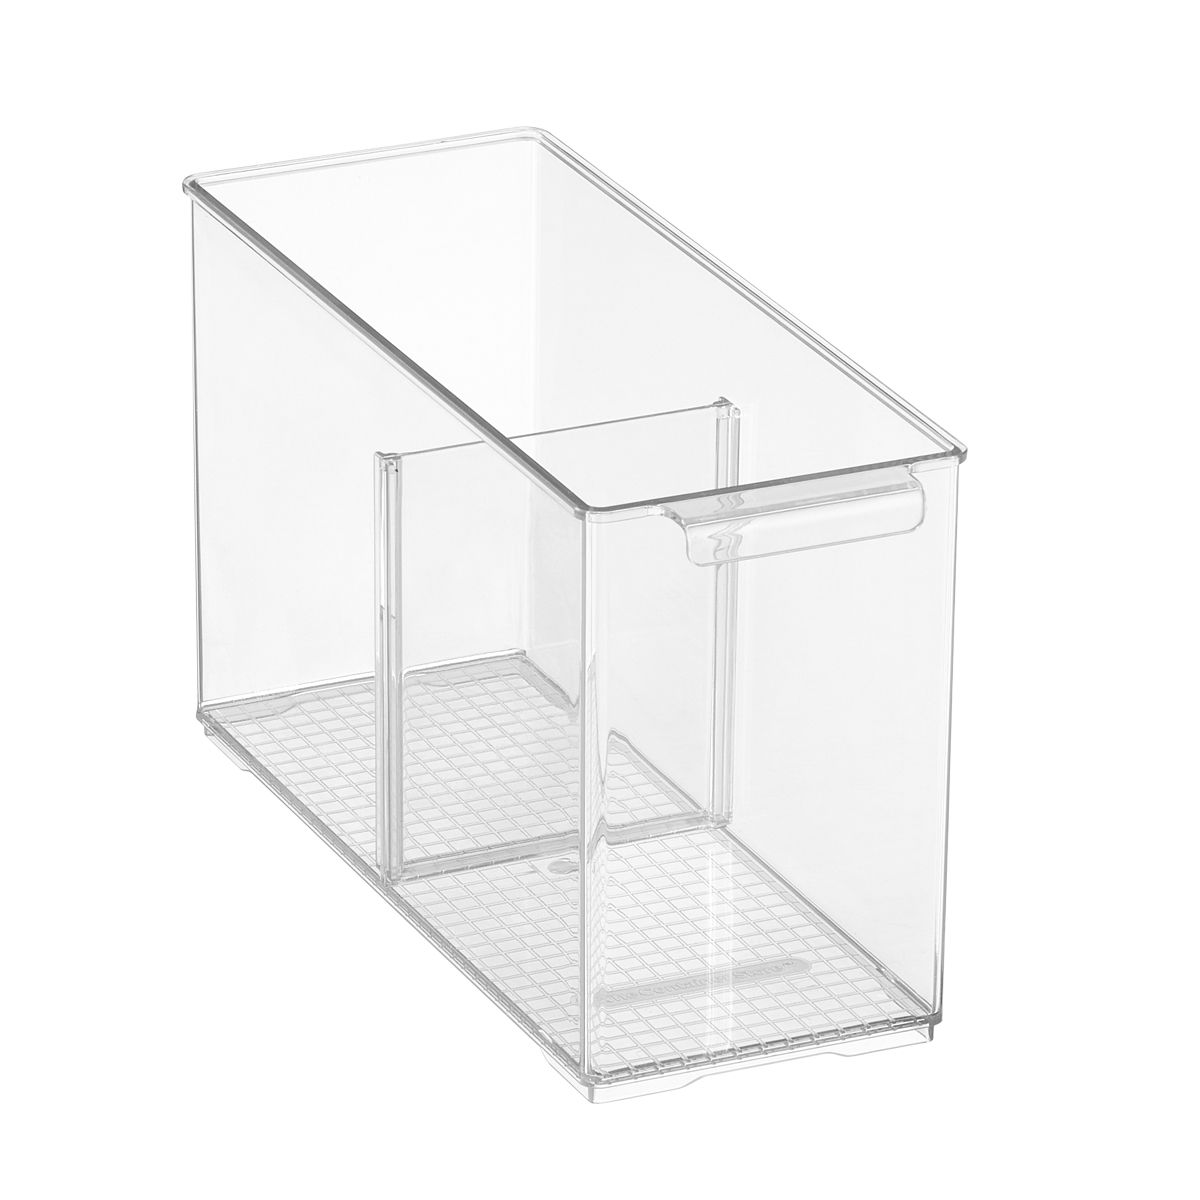 Everything Organizer Small Cabinet Depth Pantry Bin w/ Divider | The Container Store